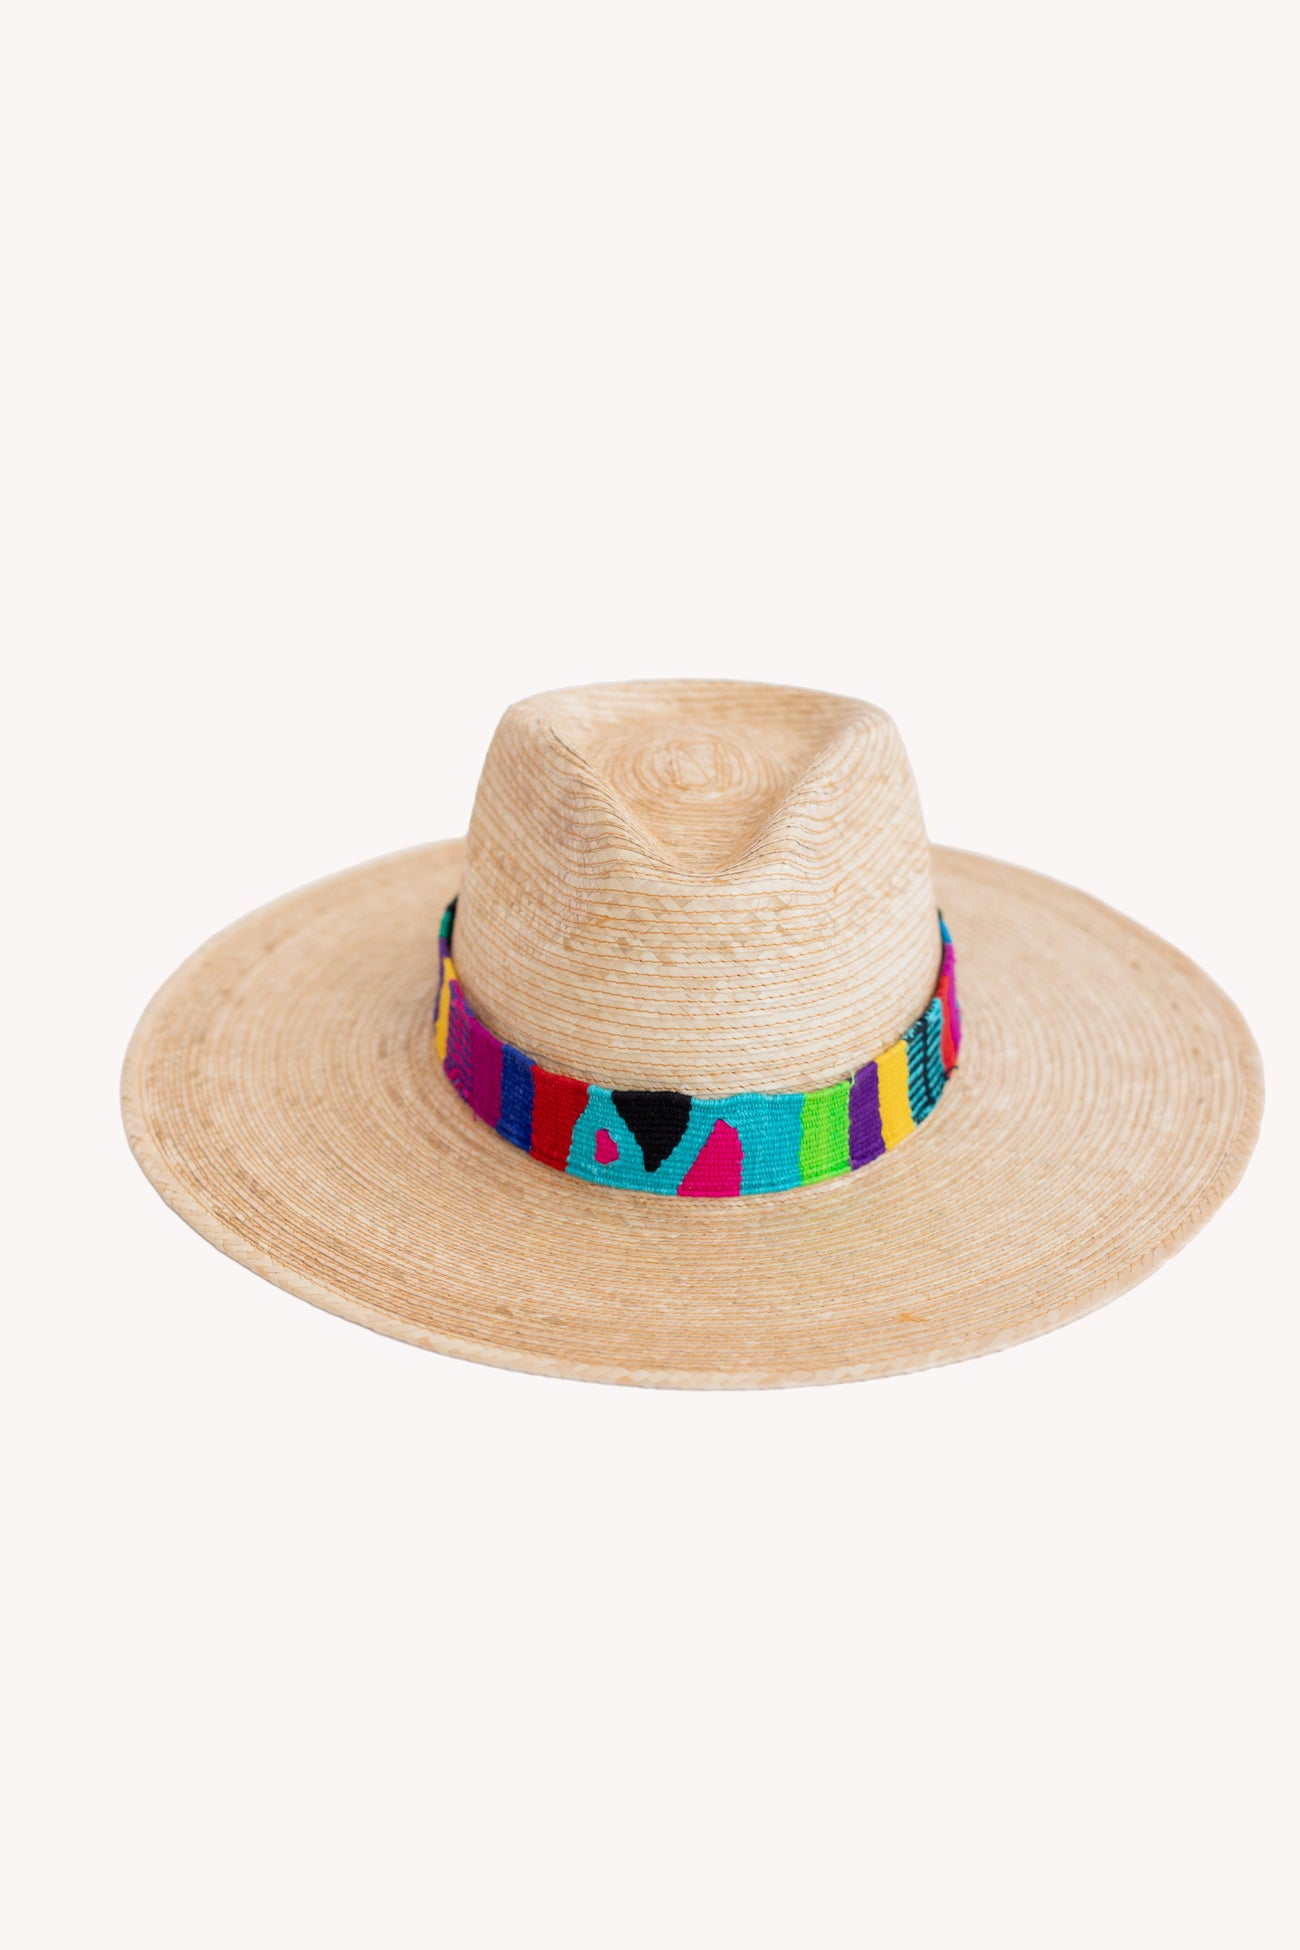 Western Straw Hat with Unity Jewel Intention Band Removable Intention Hat Textile Band